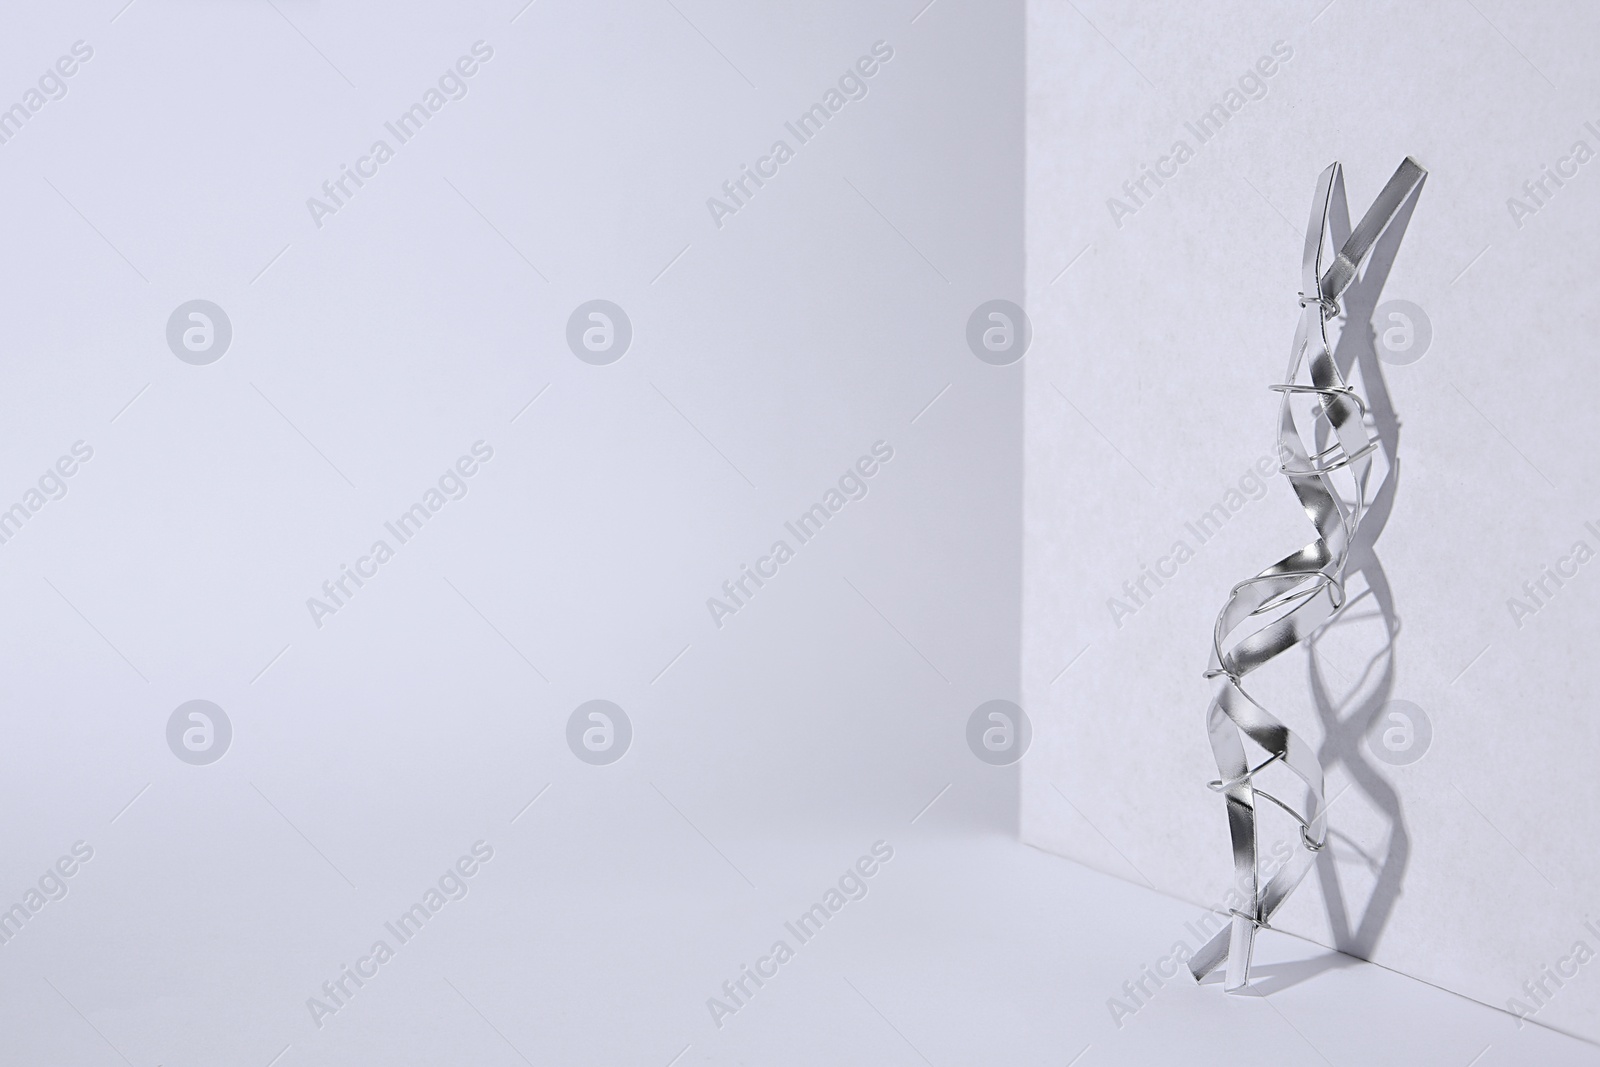 Photo of DNA molecular chain model made of metal on white background, space for text